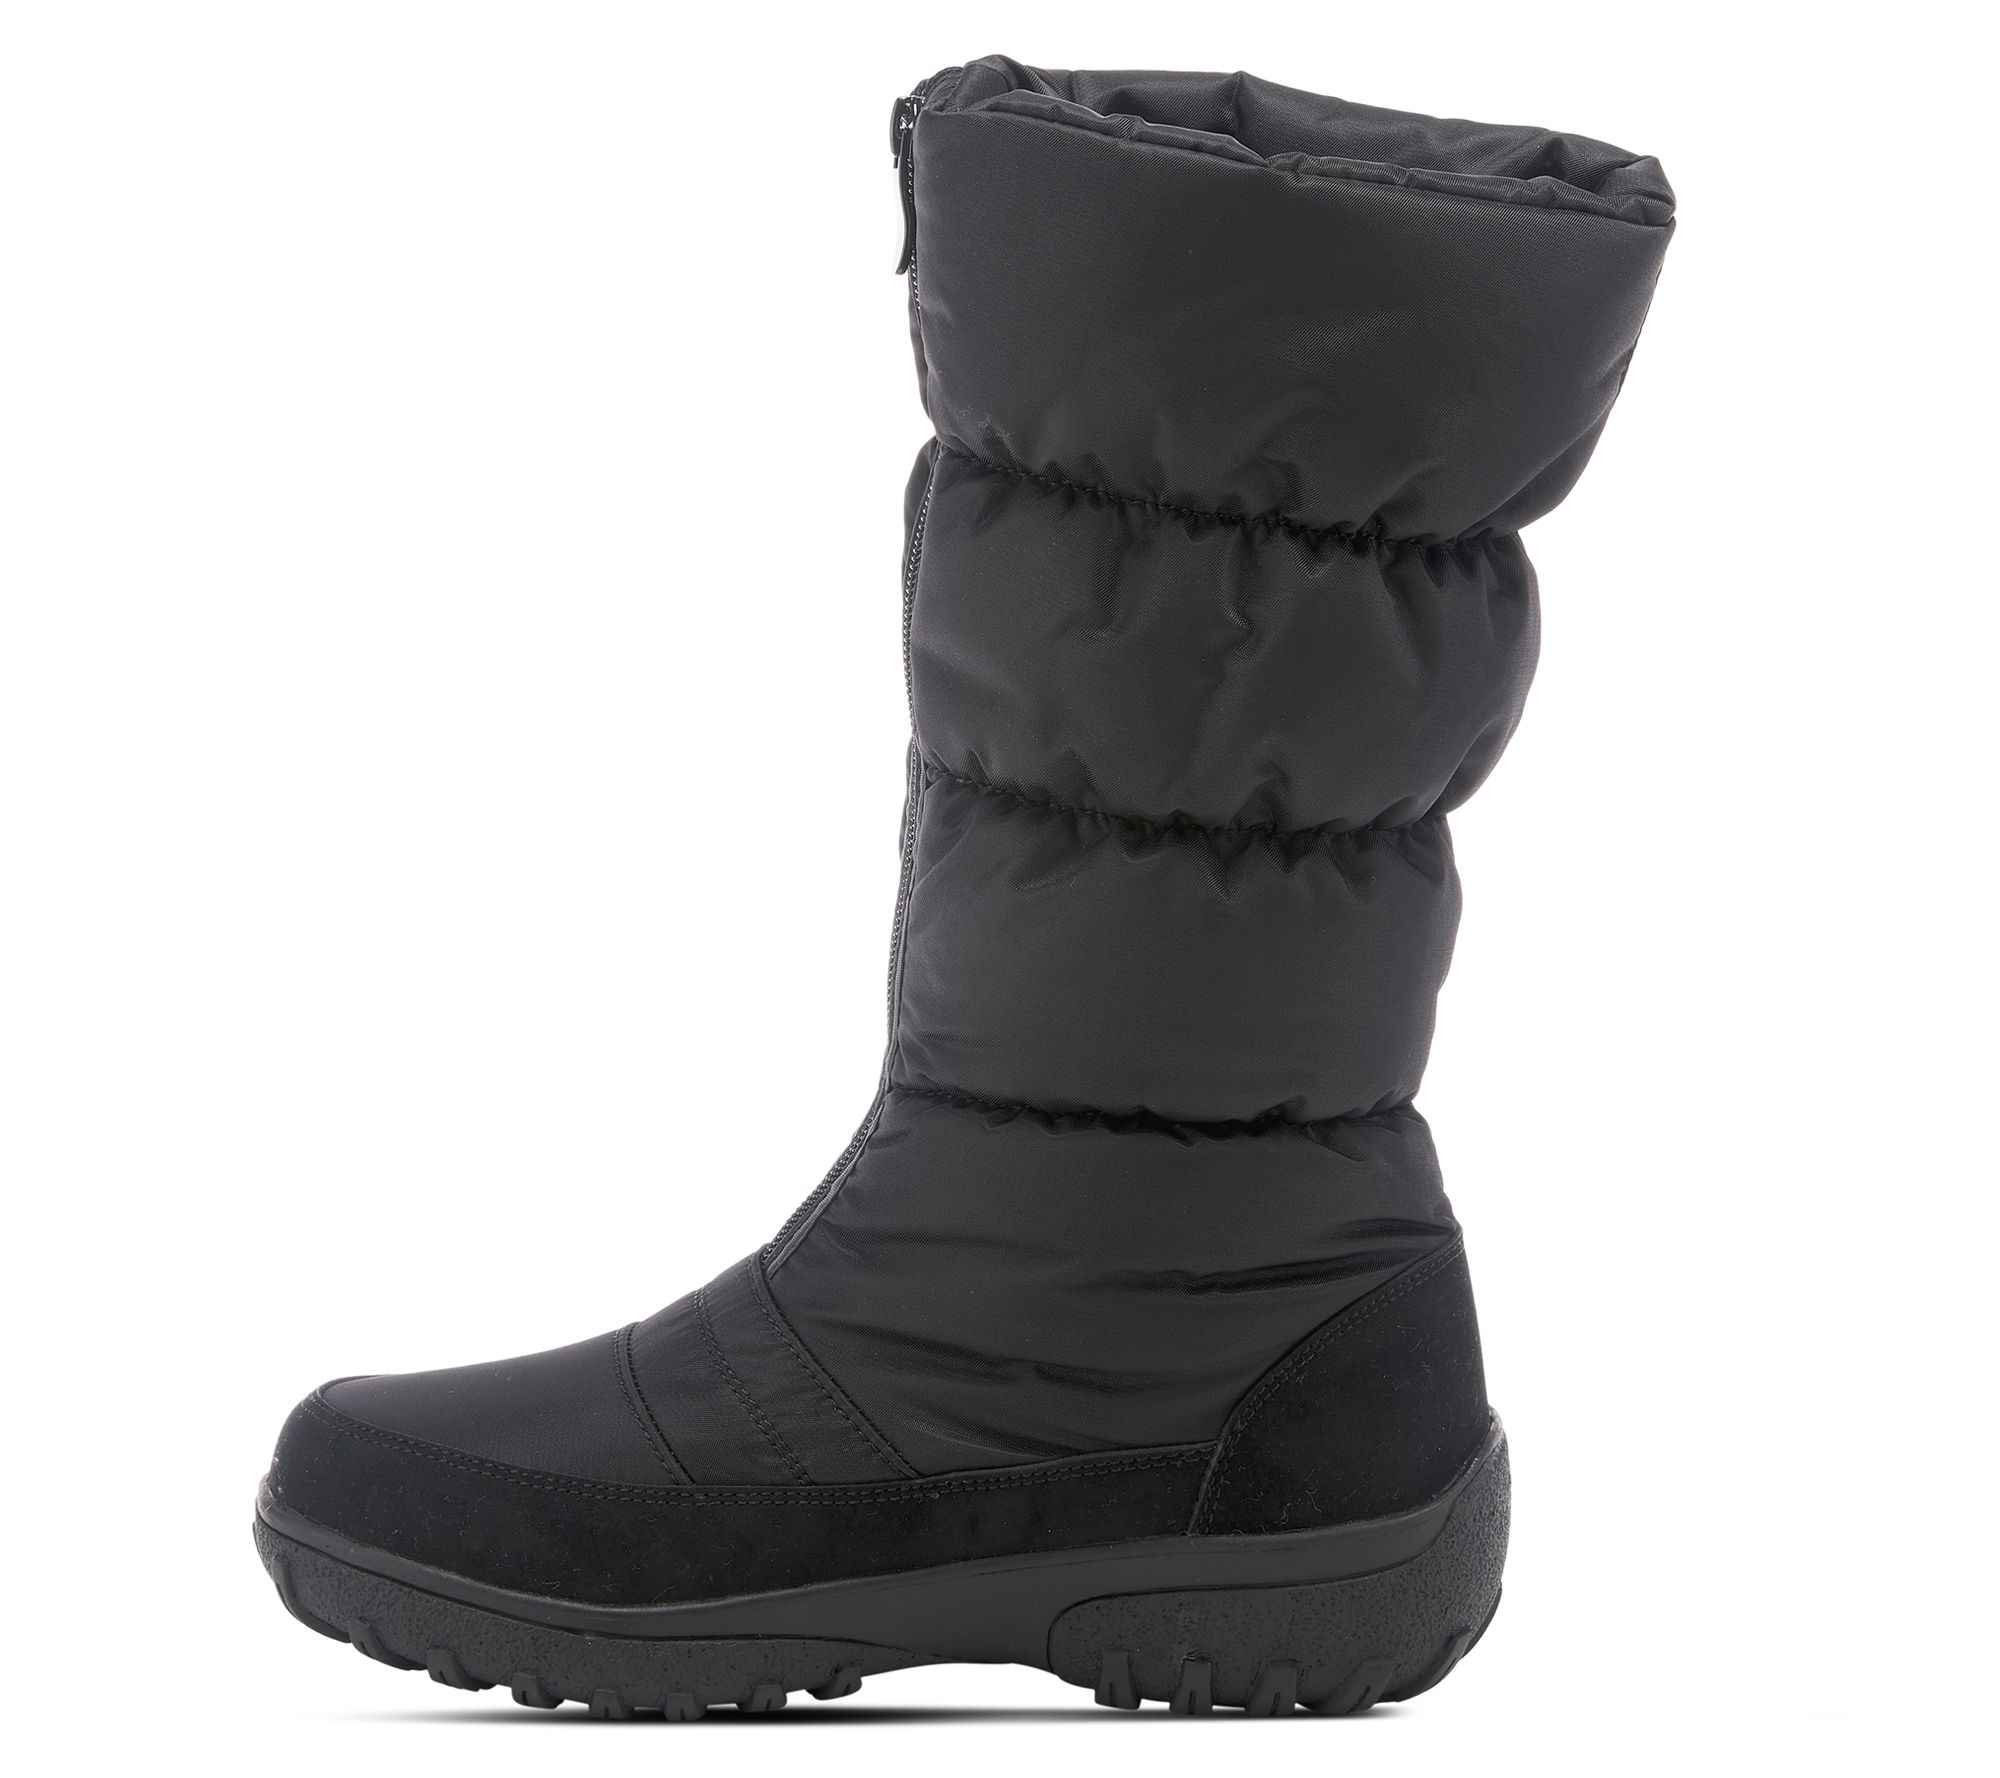 Flexus by Spring Step Waterproof Boots - Asheville - QVC.com